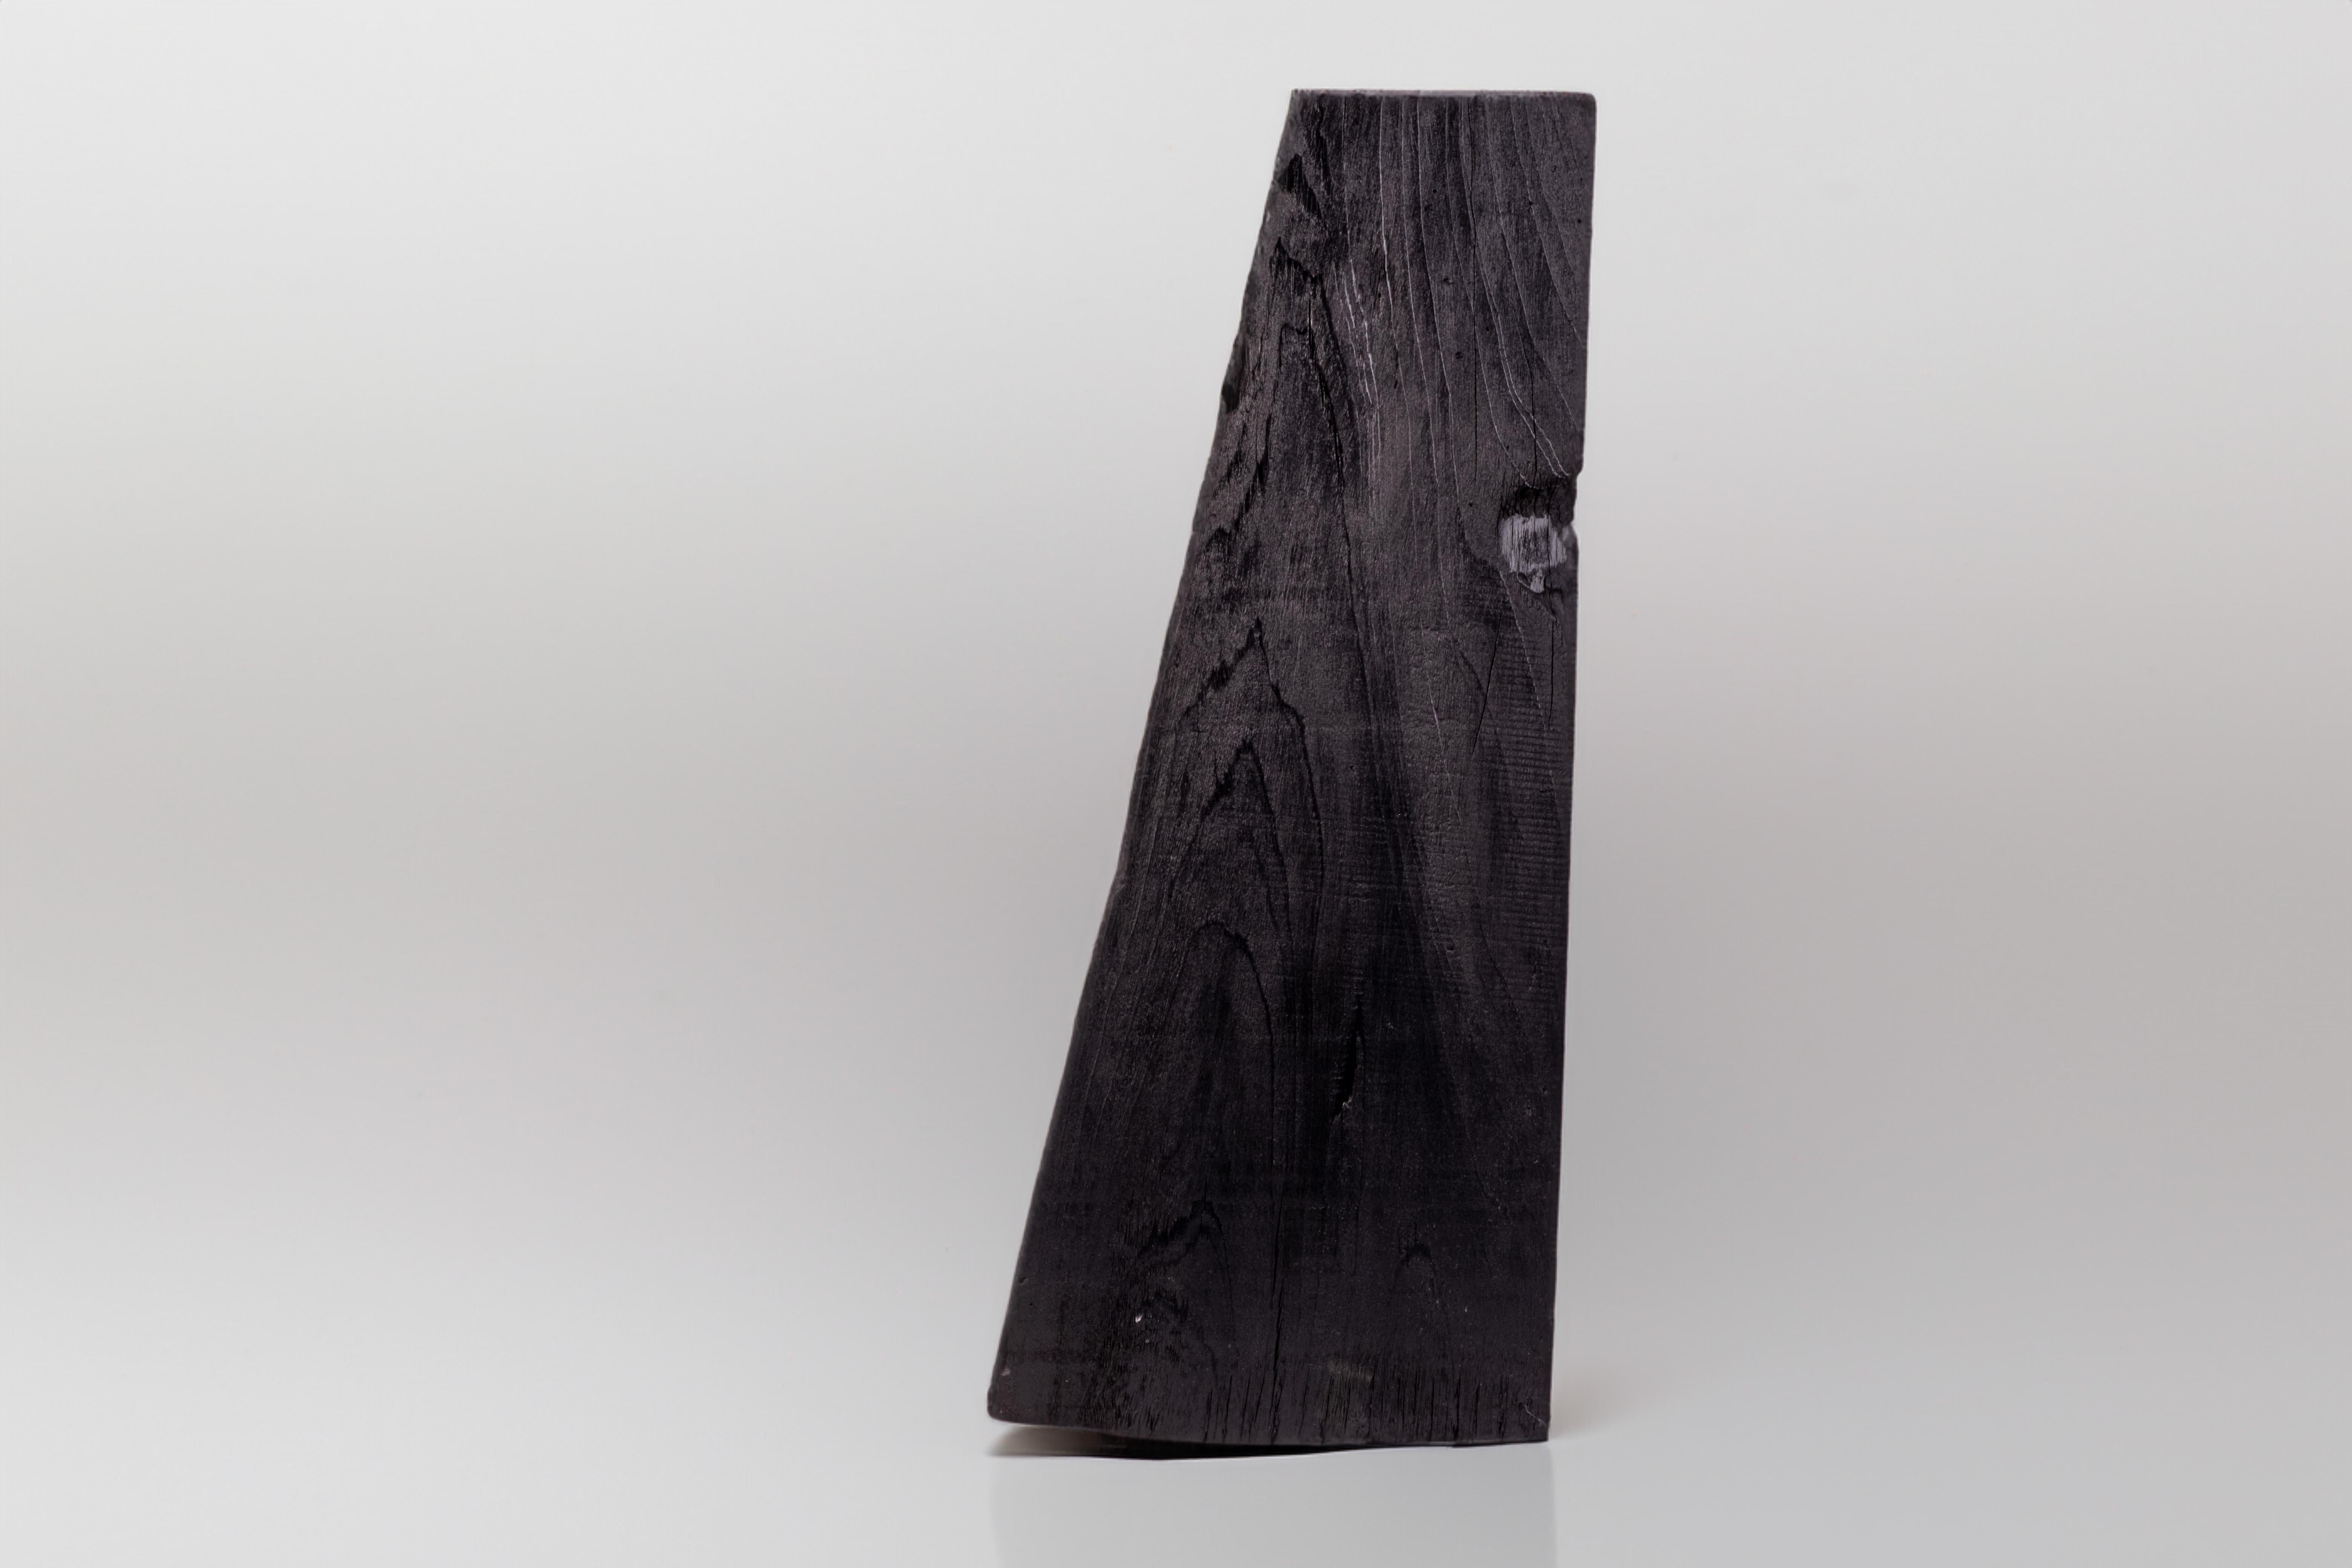 Introducing our impressive Charred Cypress Decoration, a captivating accent object or sculpture designed to enhance your space. Crafted with meticulous attention to detail, this unique piece boasts a brushed and charred finish that adds depth and